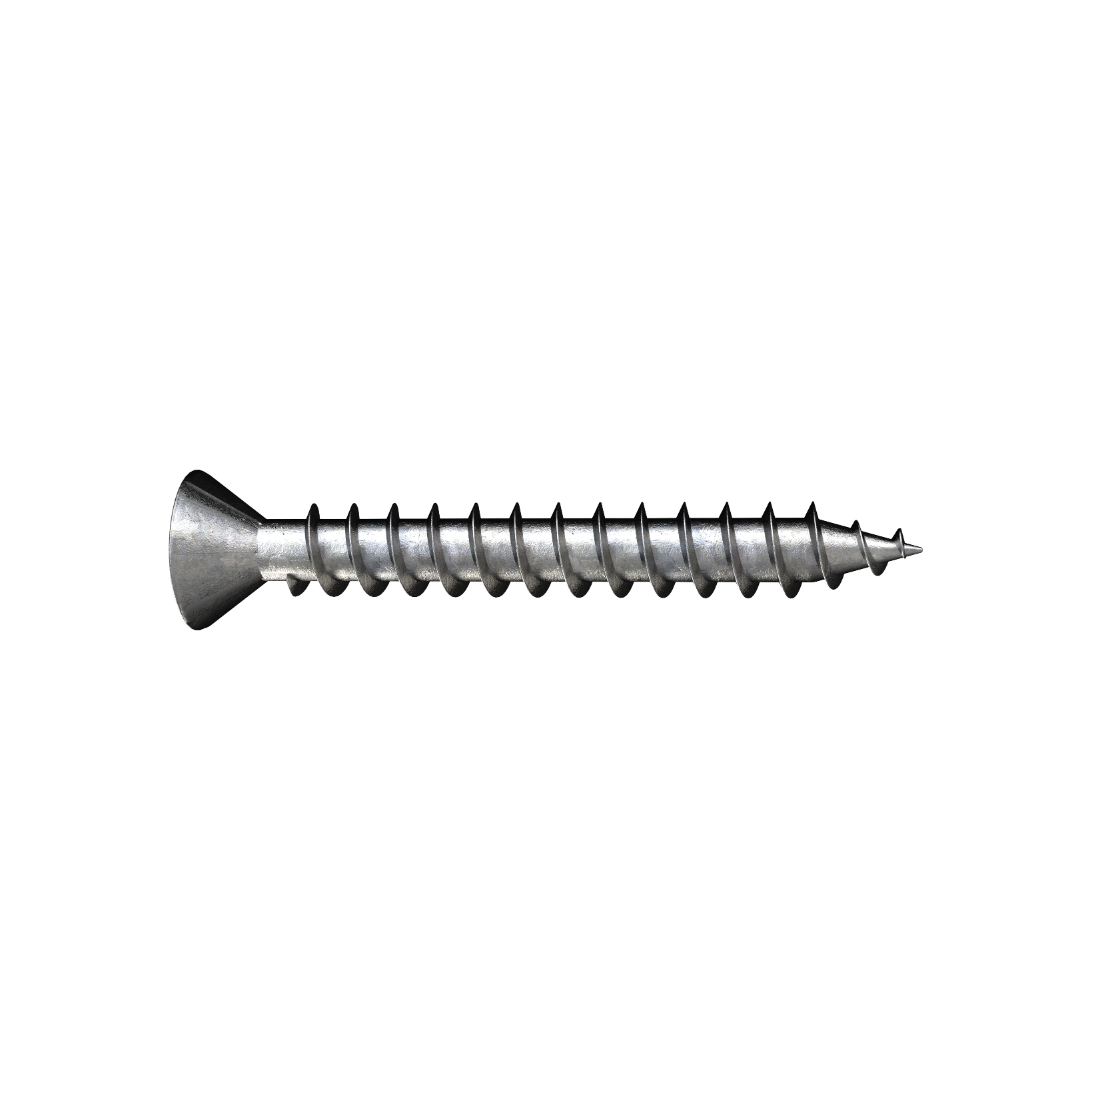 Qty 50 Chipboard Screw Square 10g x 125mm Galvanised Countersunk Treated Pine 